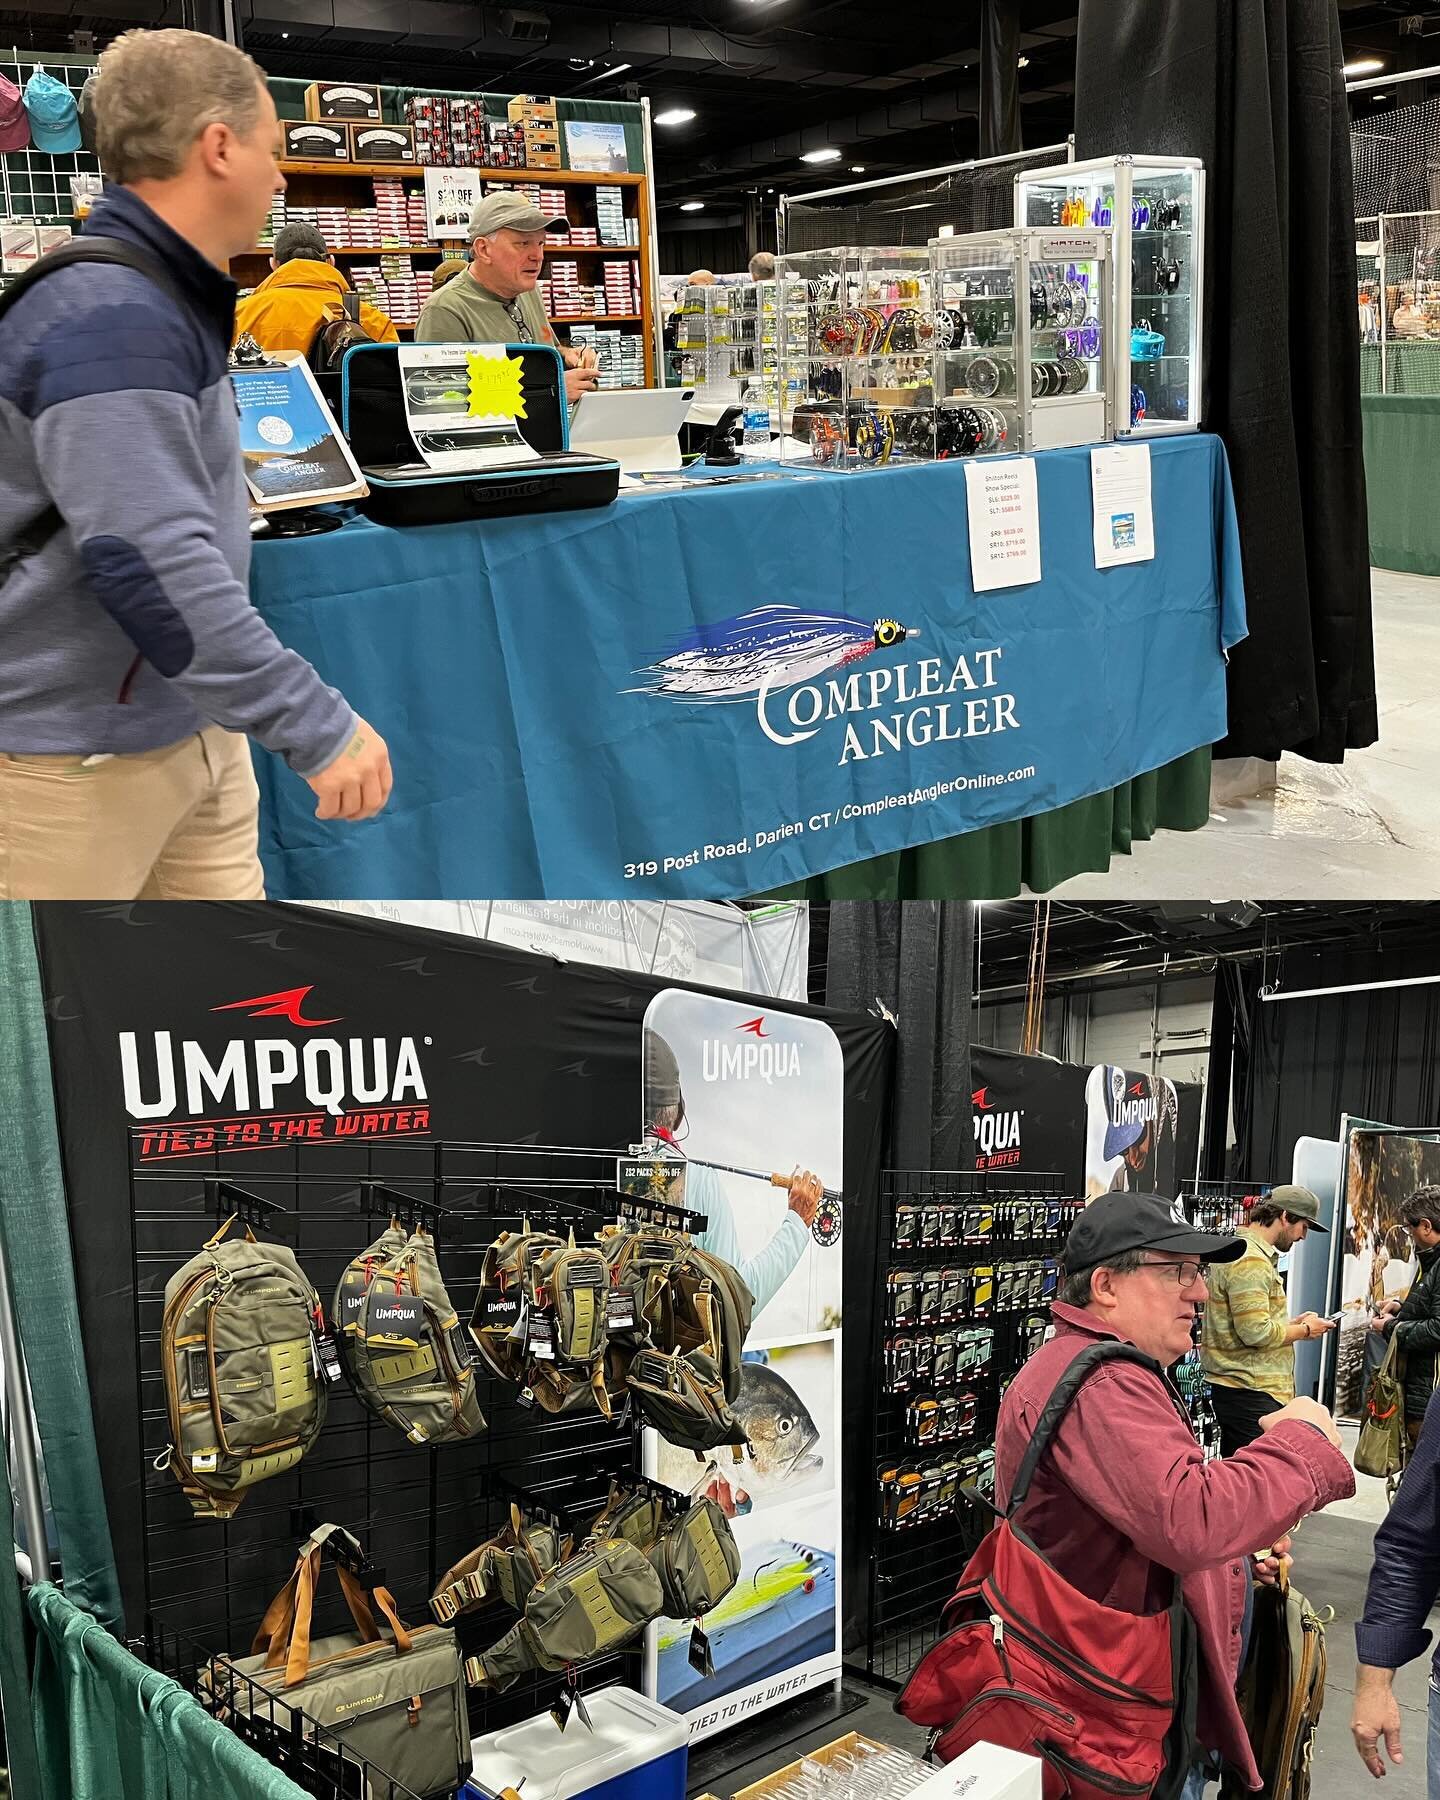 AFFTA is excited to see current members, talk to perspective members and share the vision for the organization at the @theflyfishingshow in Edison, NJ. Day one in the books, excited for the rest of the weekend!